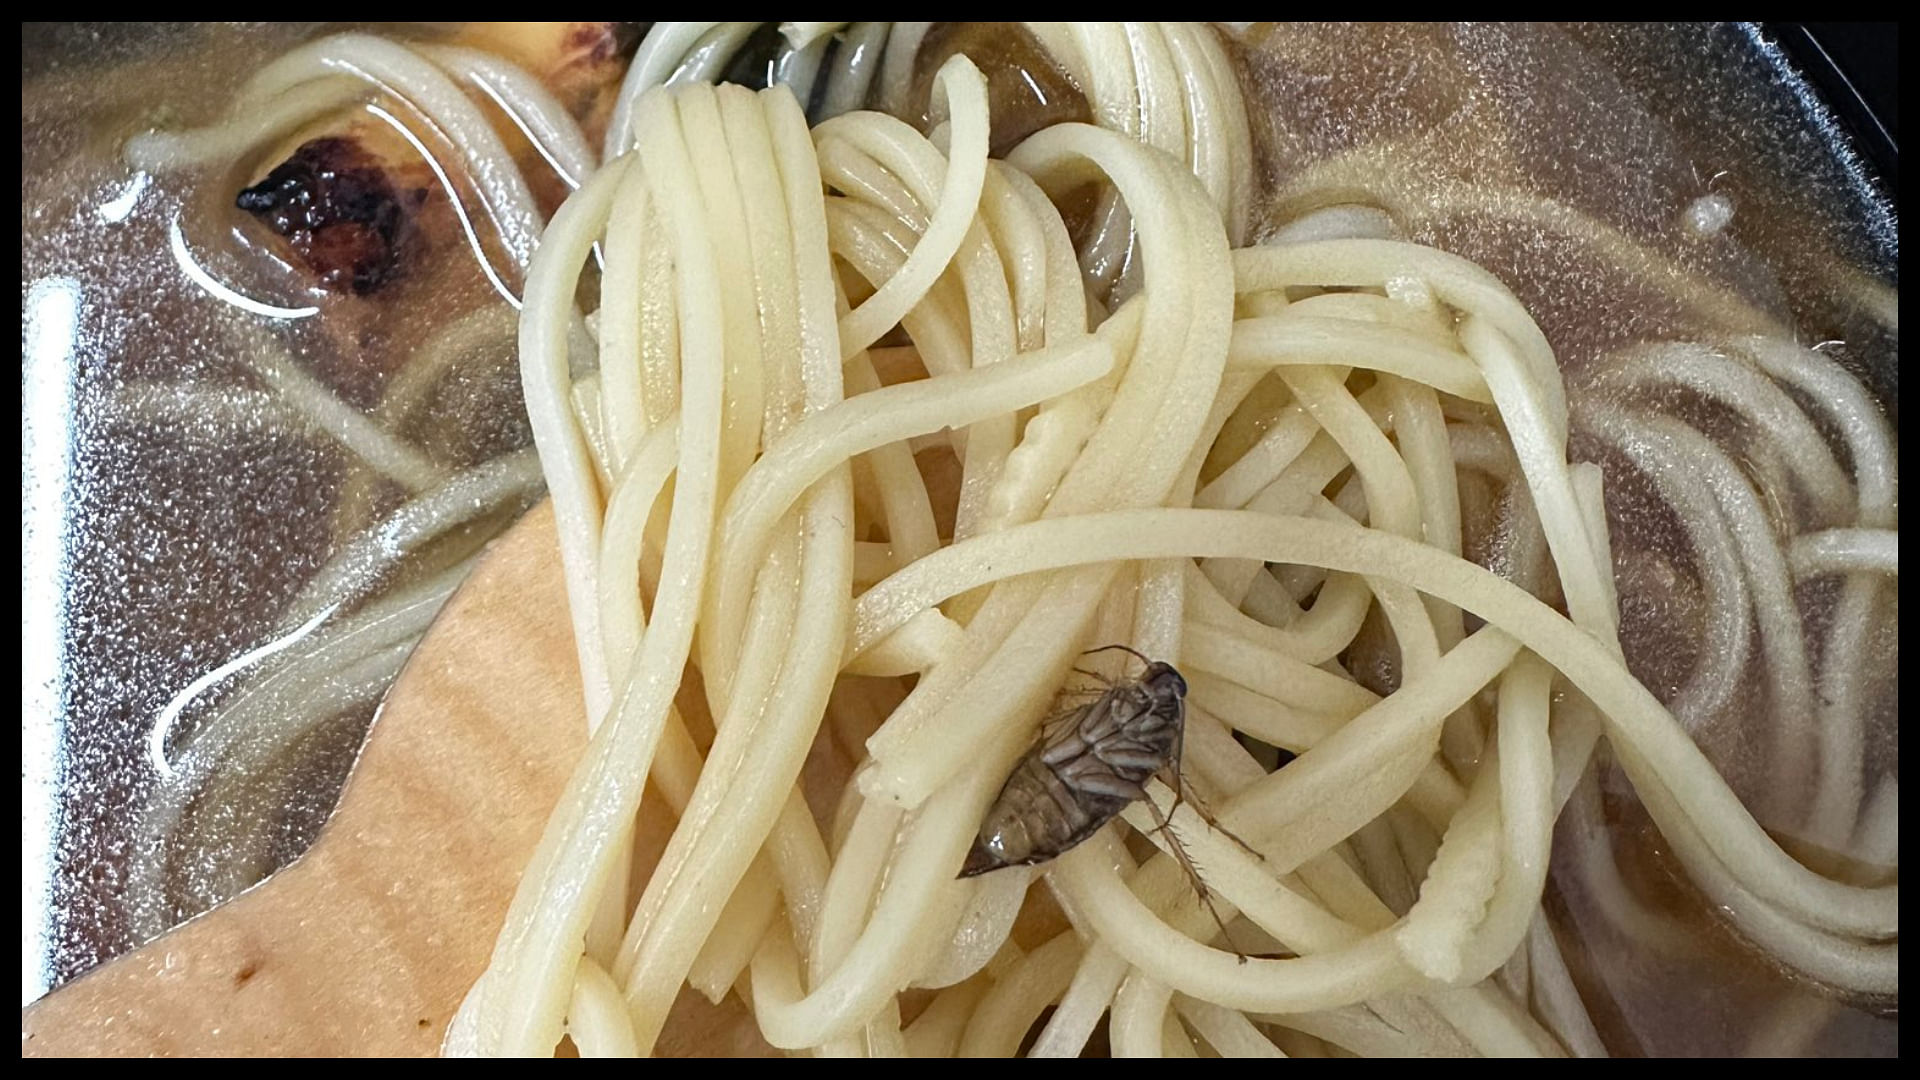 Food Delivery horrific experience woman ordered noodles finds cockroach in food company reacts